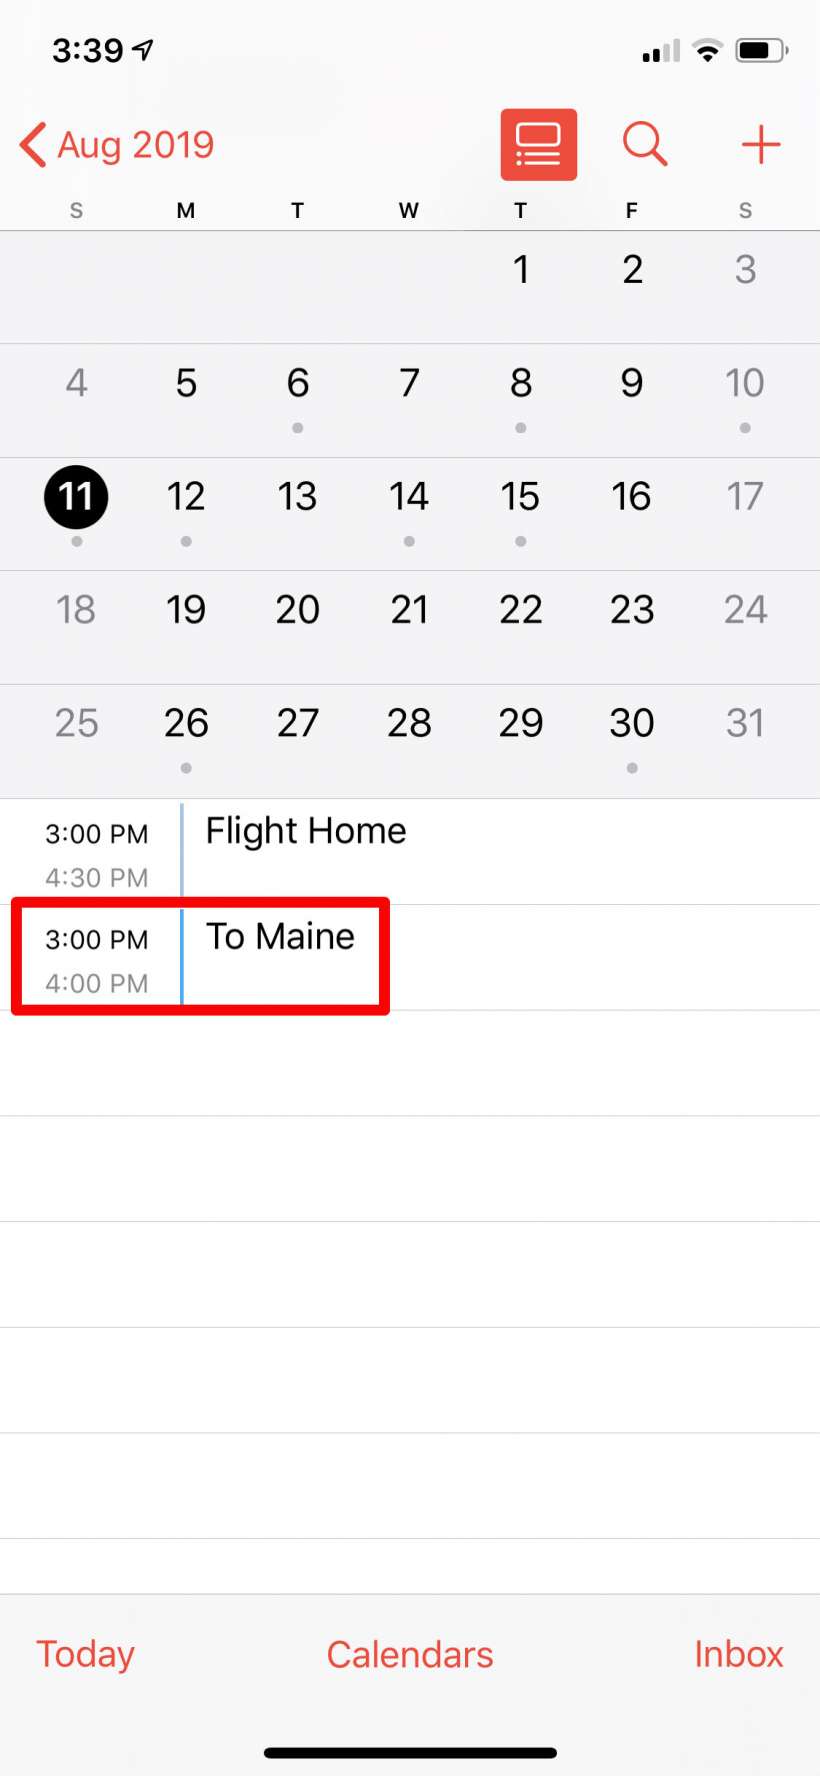 How to attach documents to your Calendar events on iPhone and iPad.